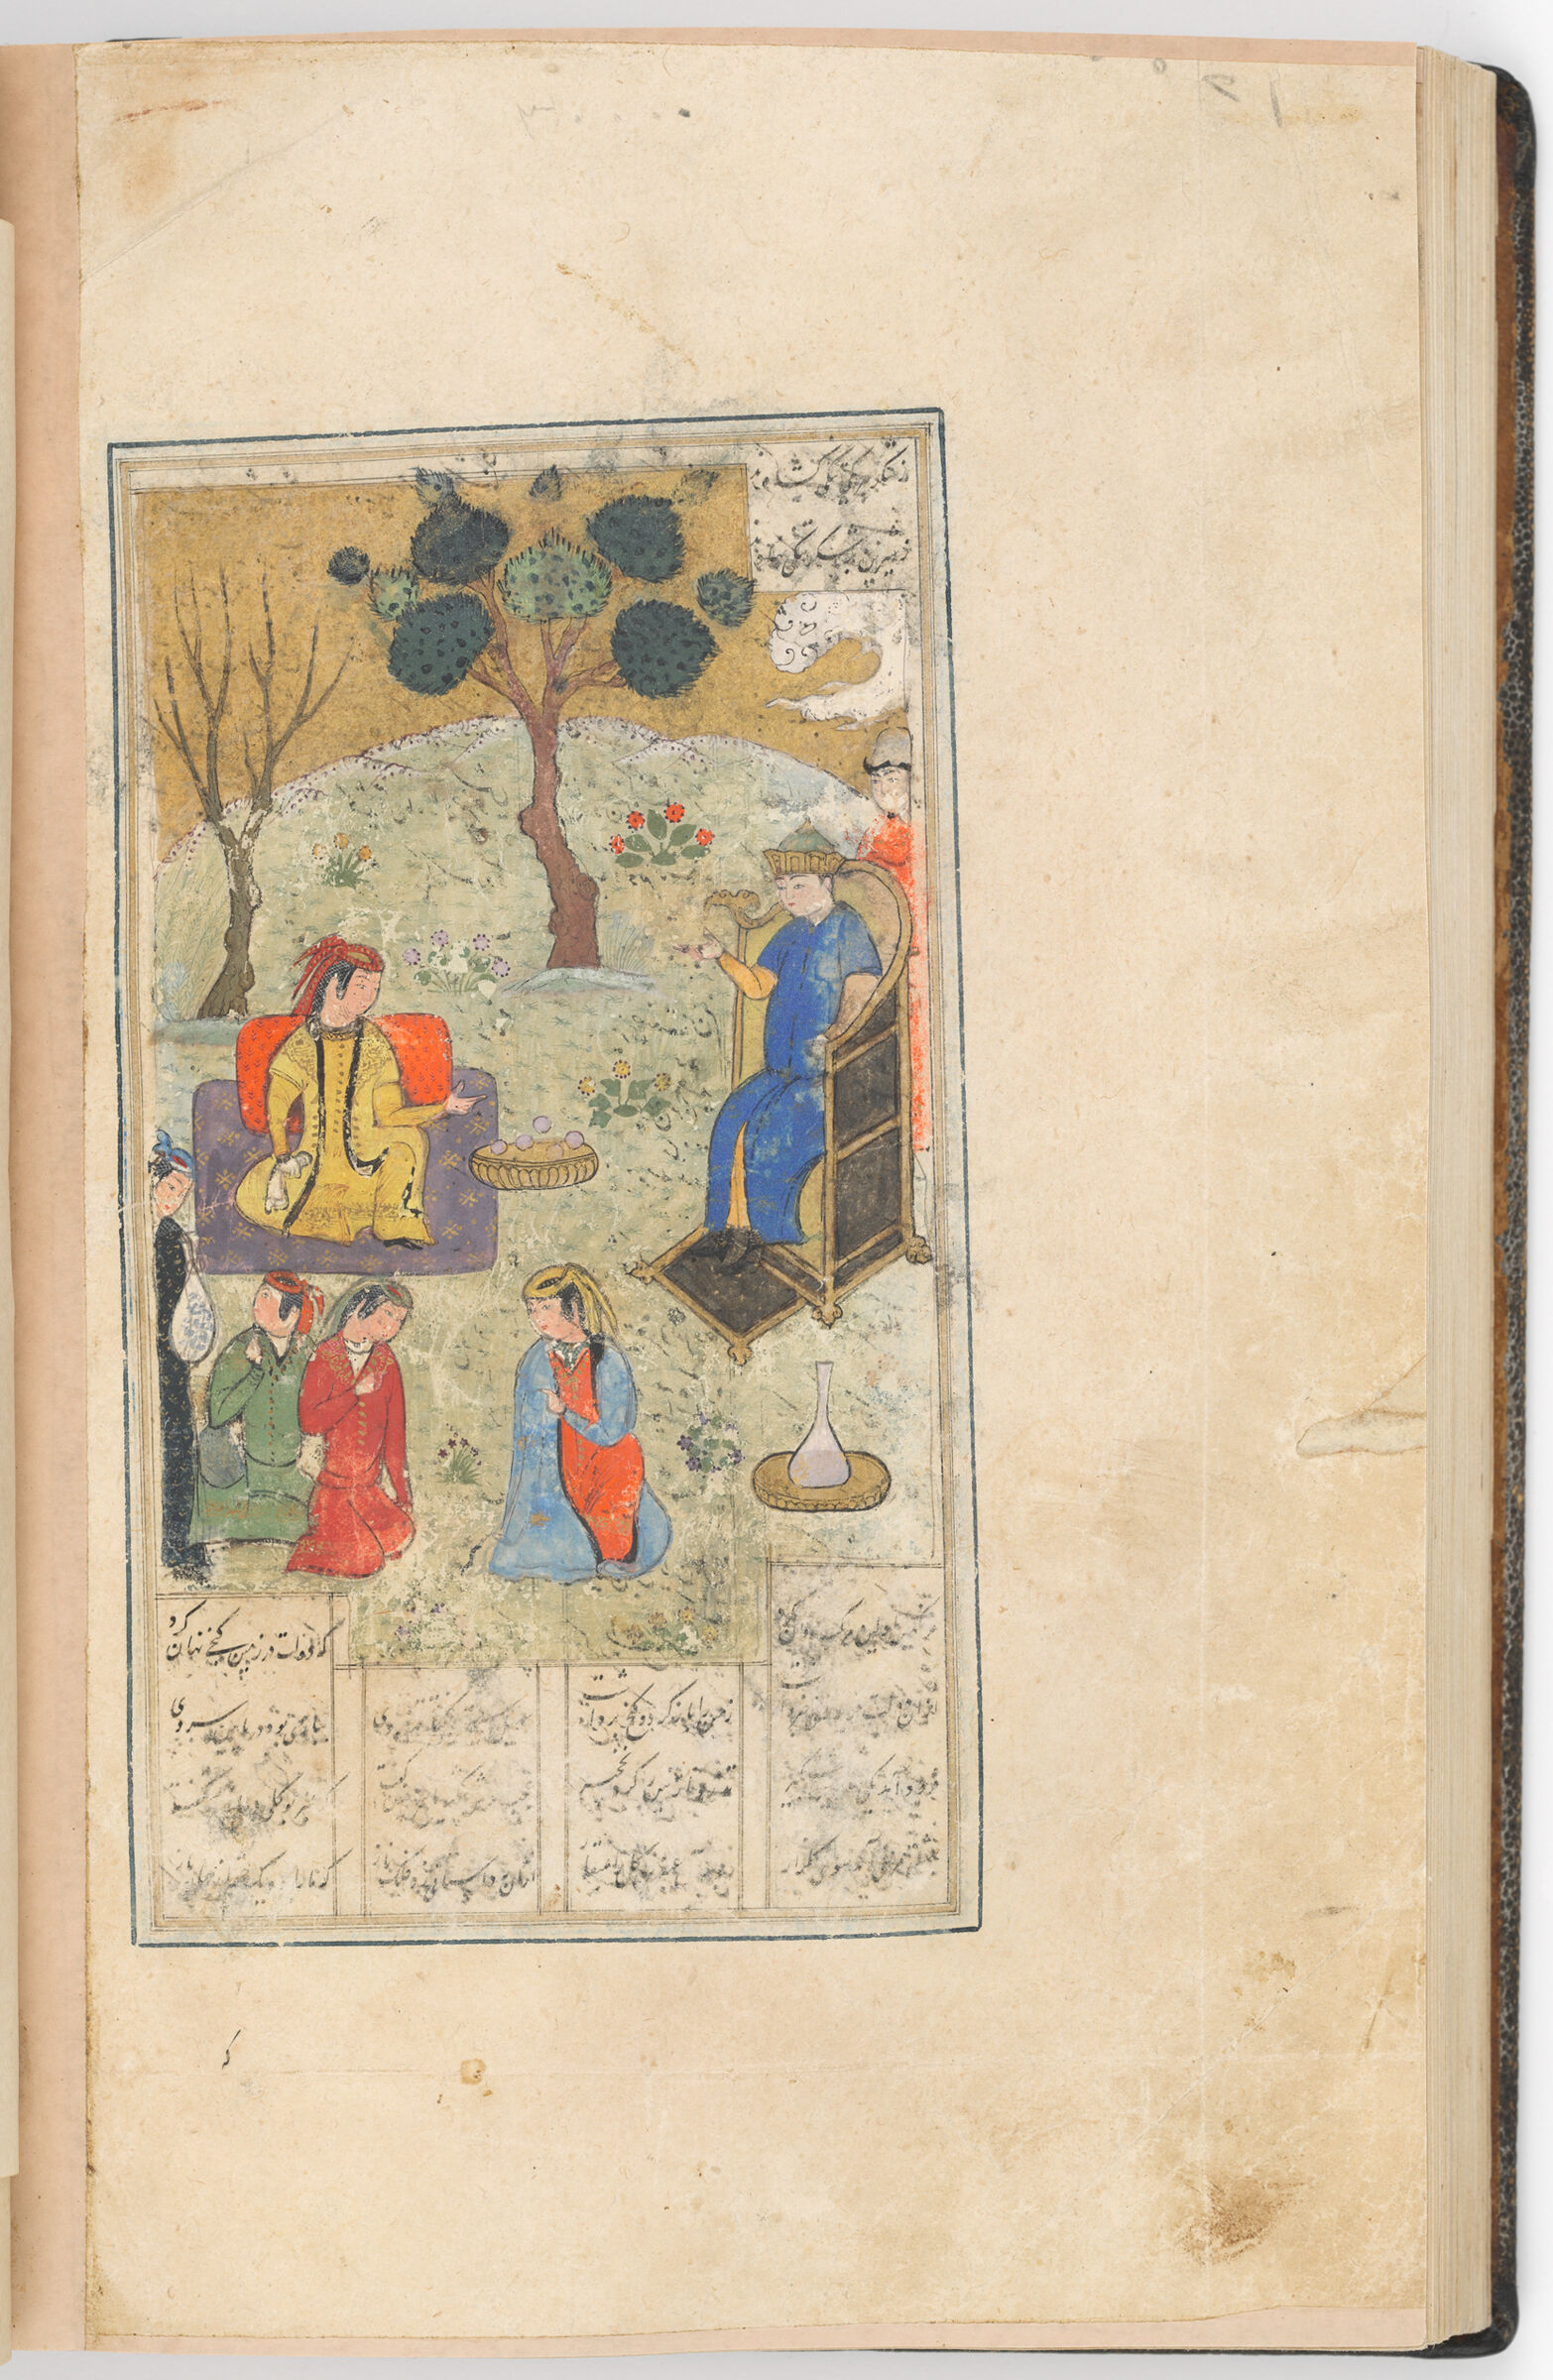 Khusraw, Shirin, Shapur And The Girls Telling Stories (Text Recto; Painting Verso Of Folio 165), Painting From A Manuscript Of The Khamsa By Nizami